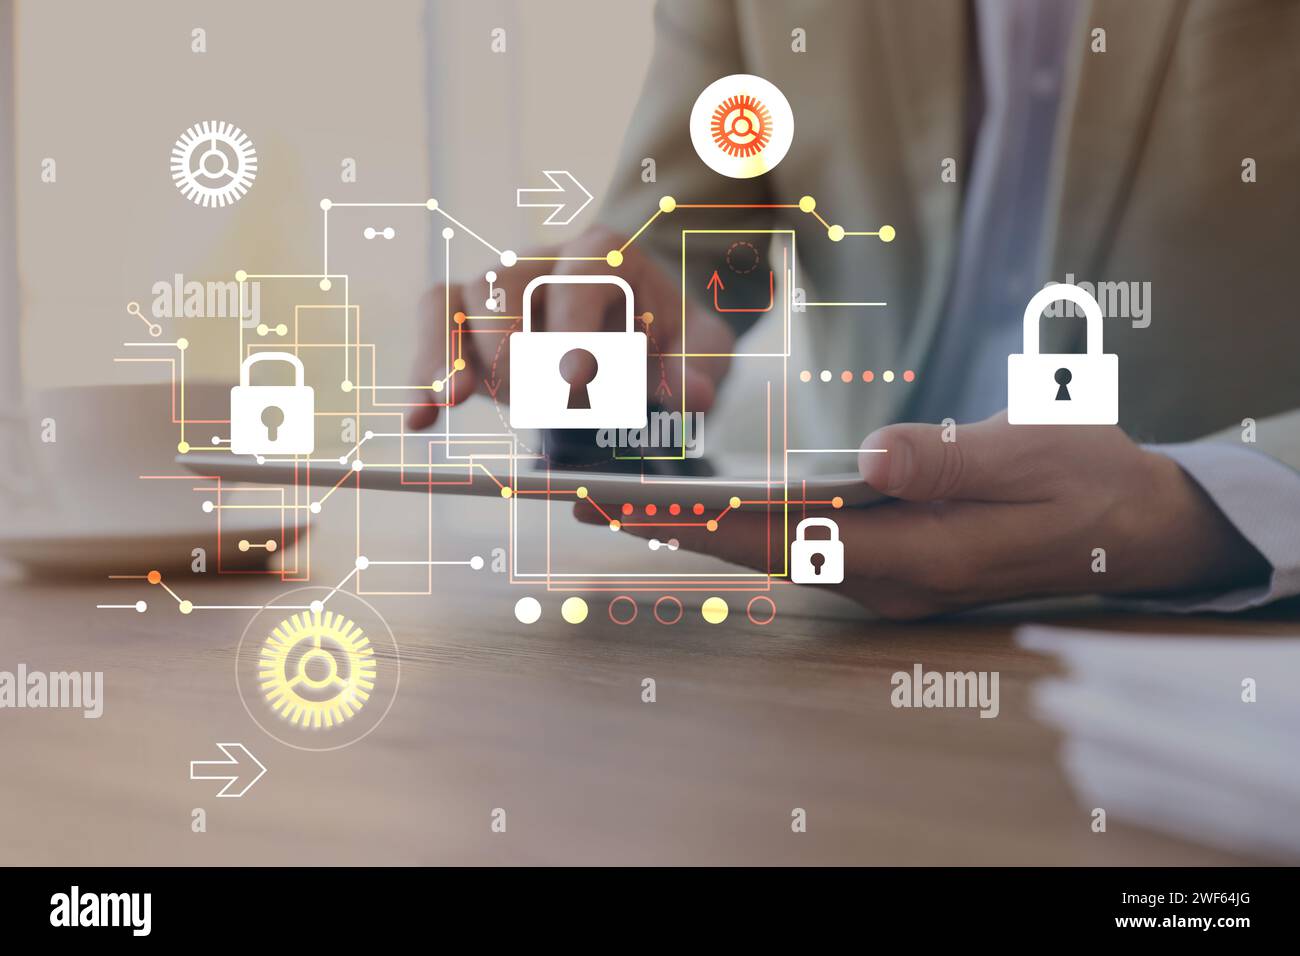 Privacy protection. Man using tablet at table, closeup. Digital scheme with padlocks over device Stock Photo